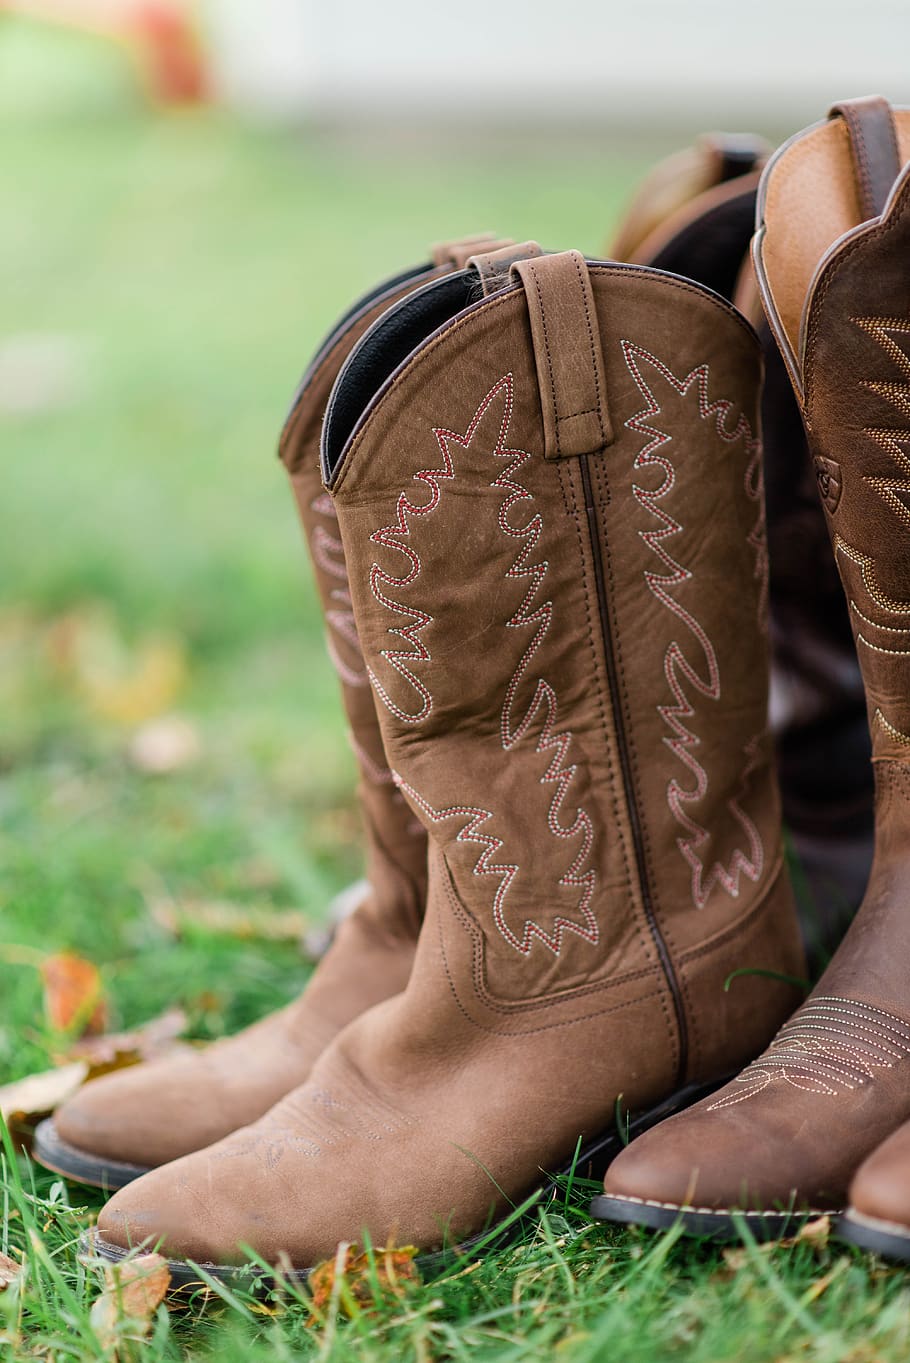 cowboy boots, boots, cowboy, western, cowgirl, country, cowboys, country girl, country music, shoes